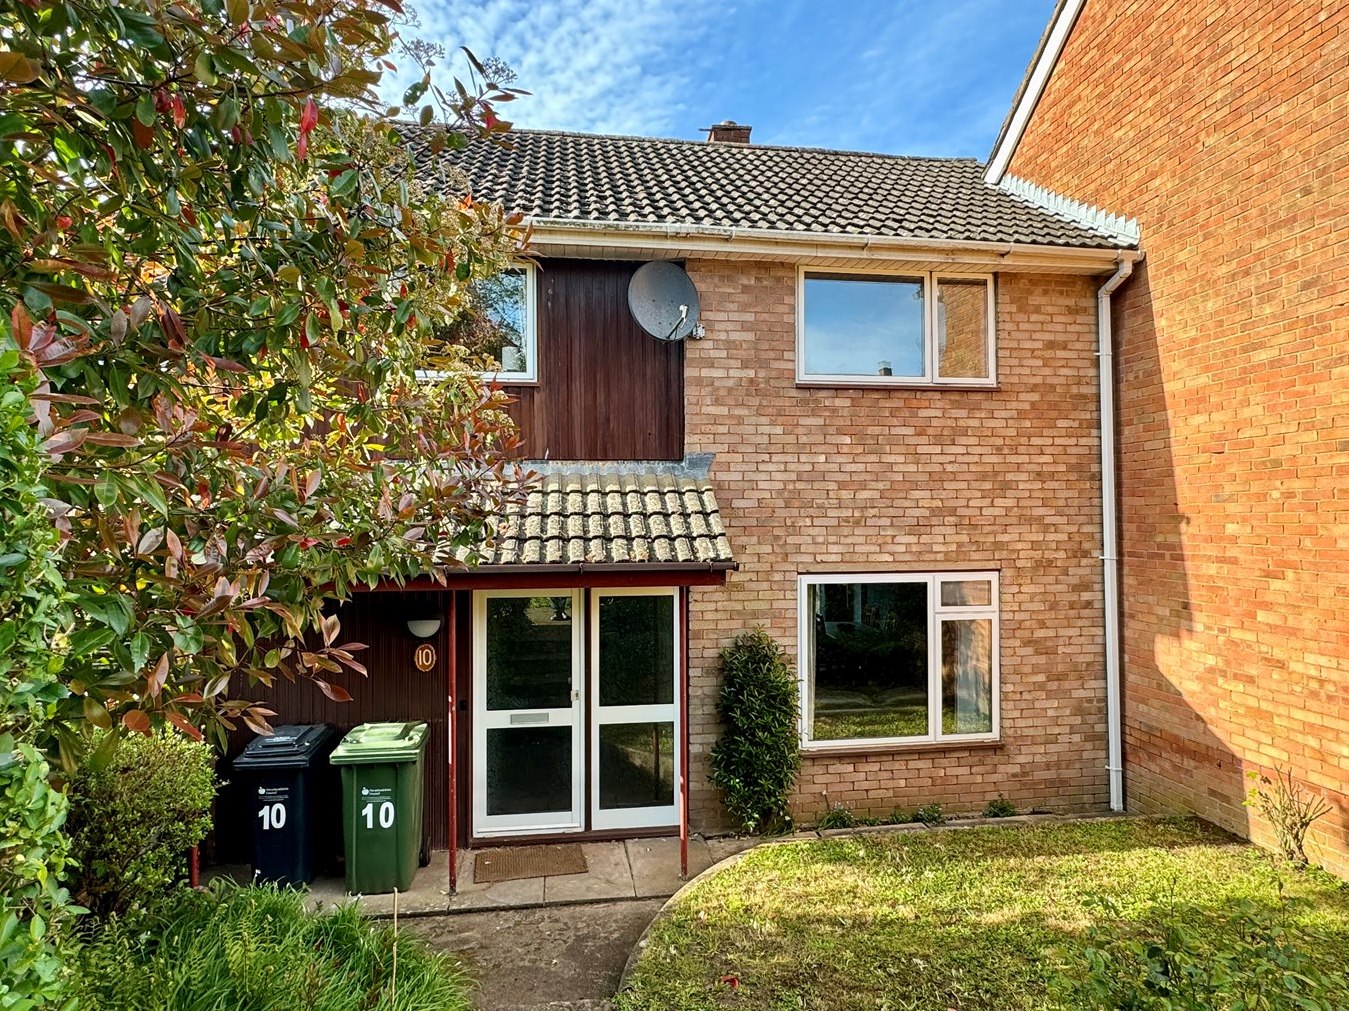 FEATURED | A three bedroom property in Hereford that is on the market from just £199,950!